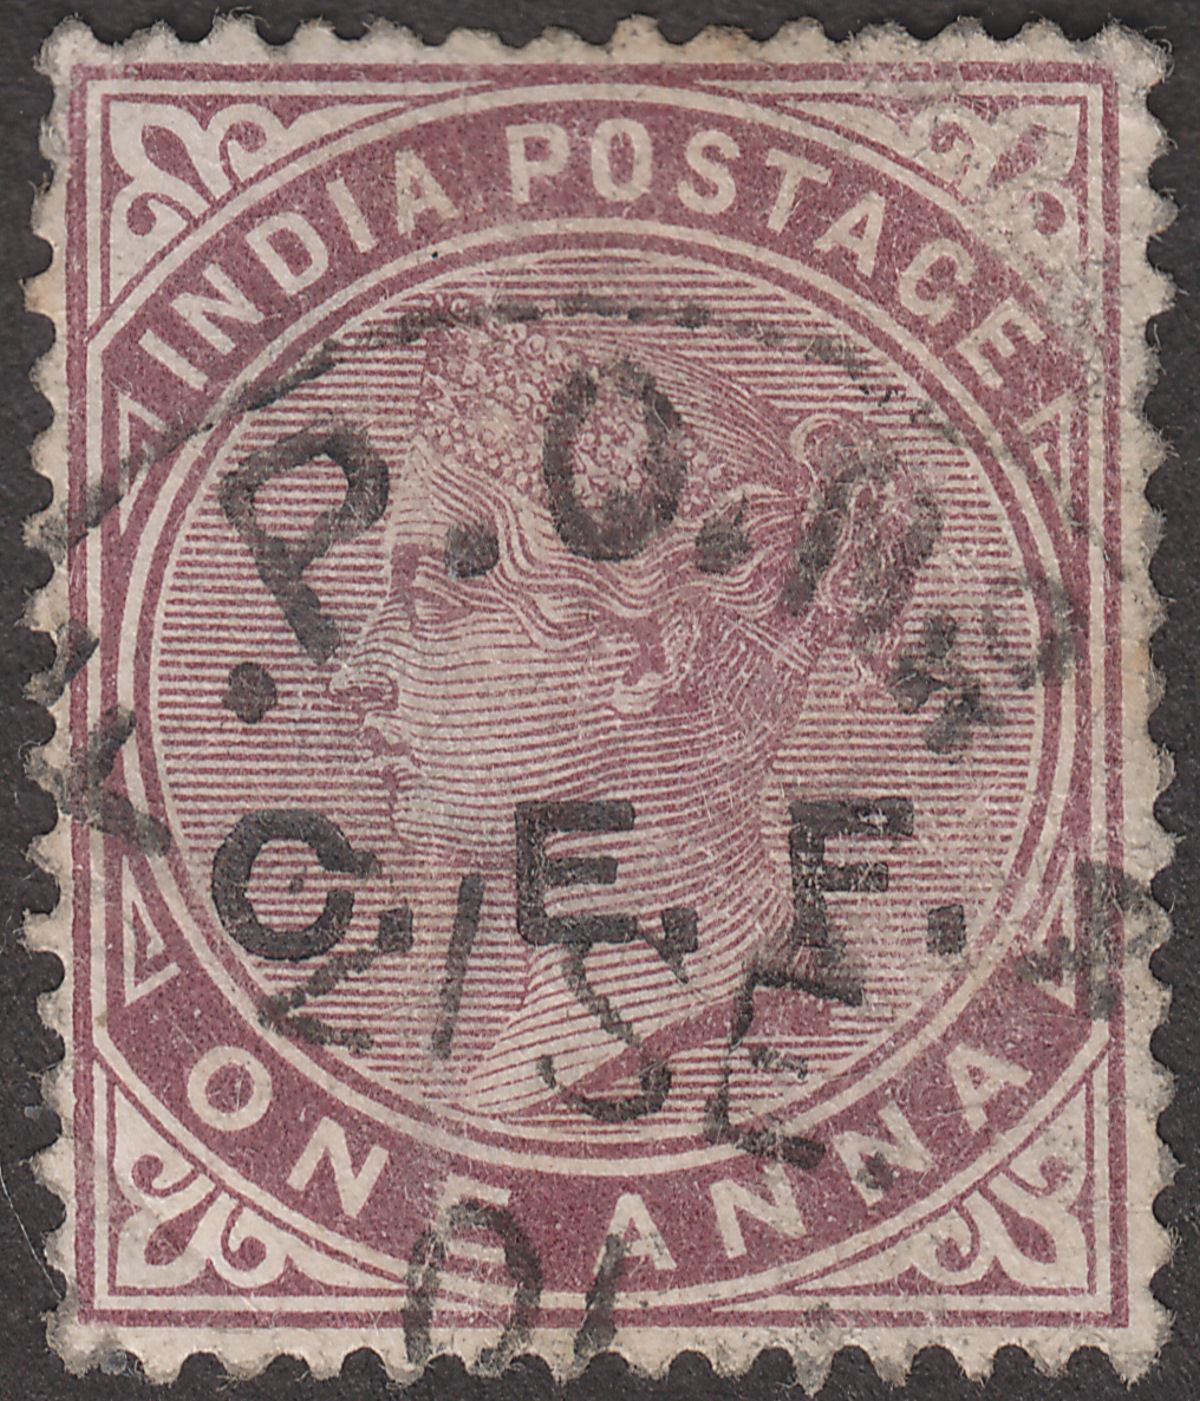 India 1900 QV China Expeditionary Force CEF Opt 1a Used with FPO Postmark Tongku